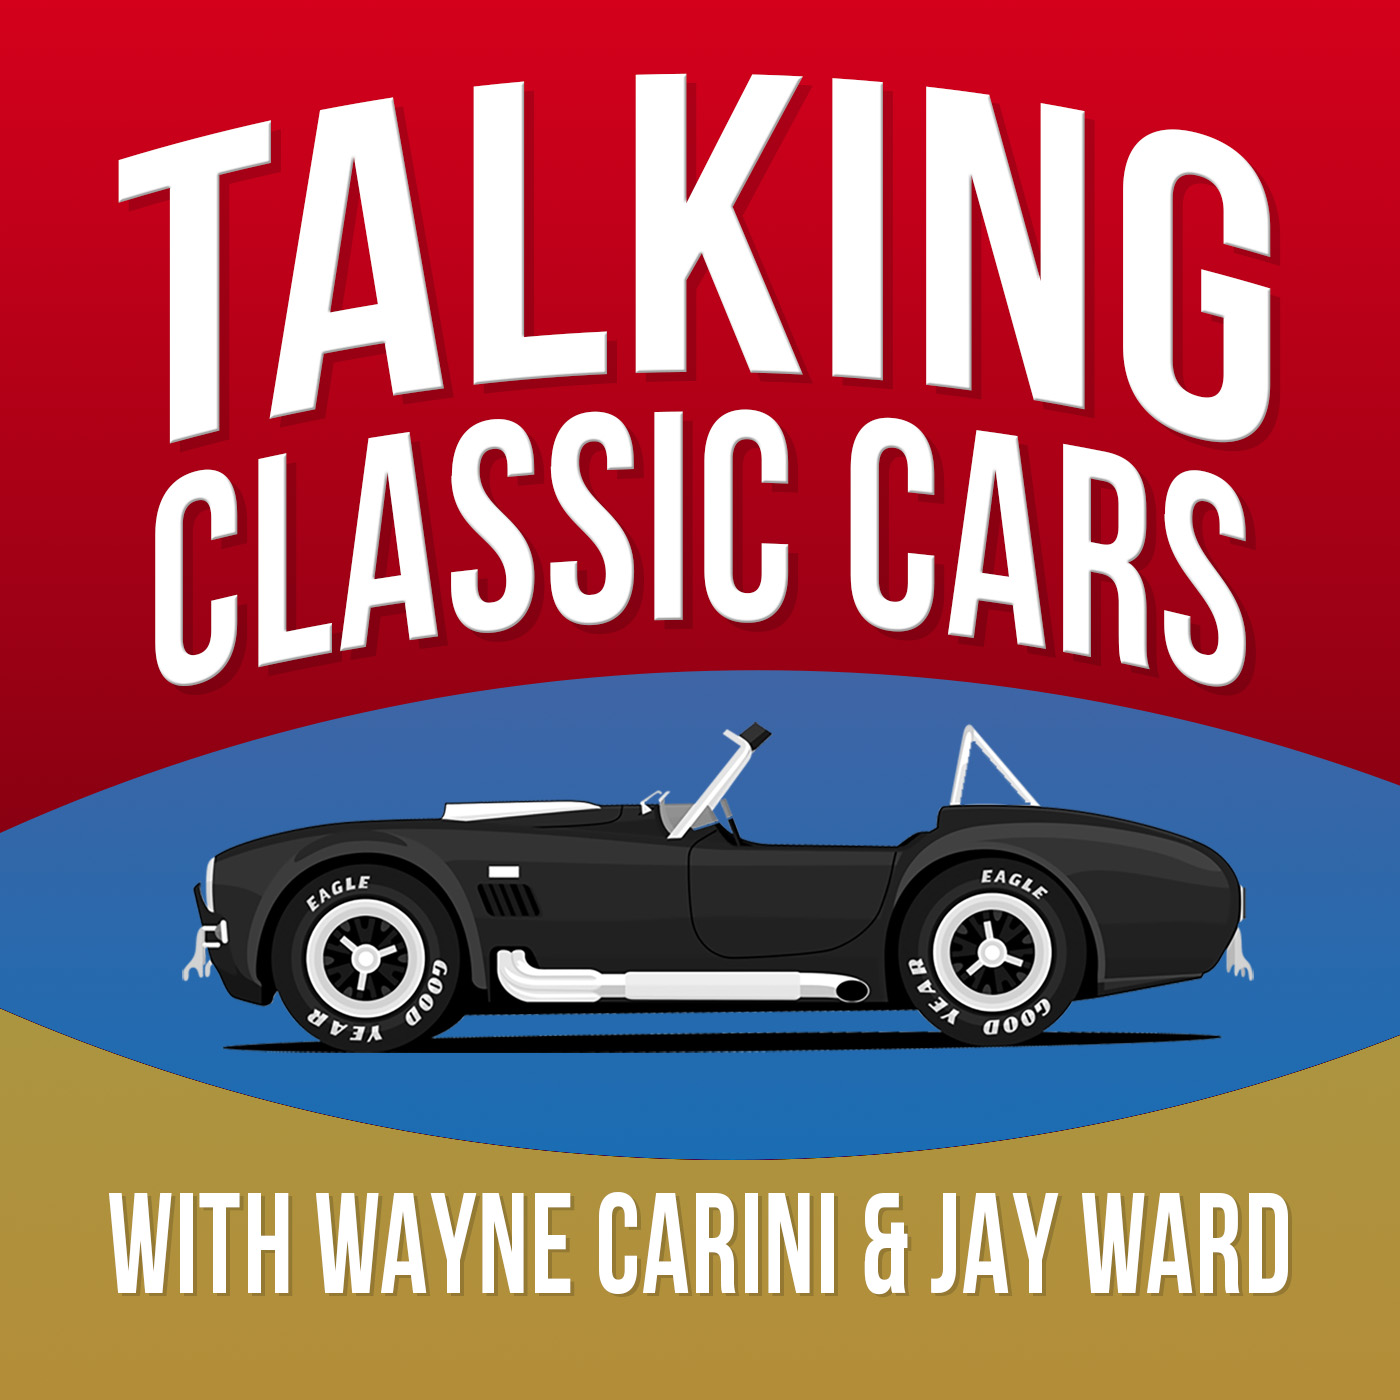 Artwork for podcast Talking Classic Cars